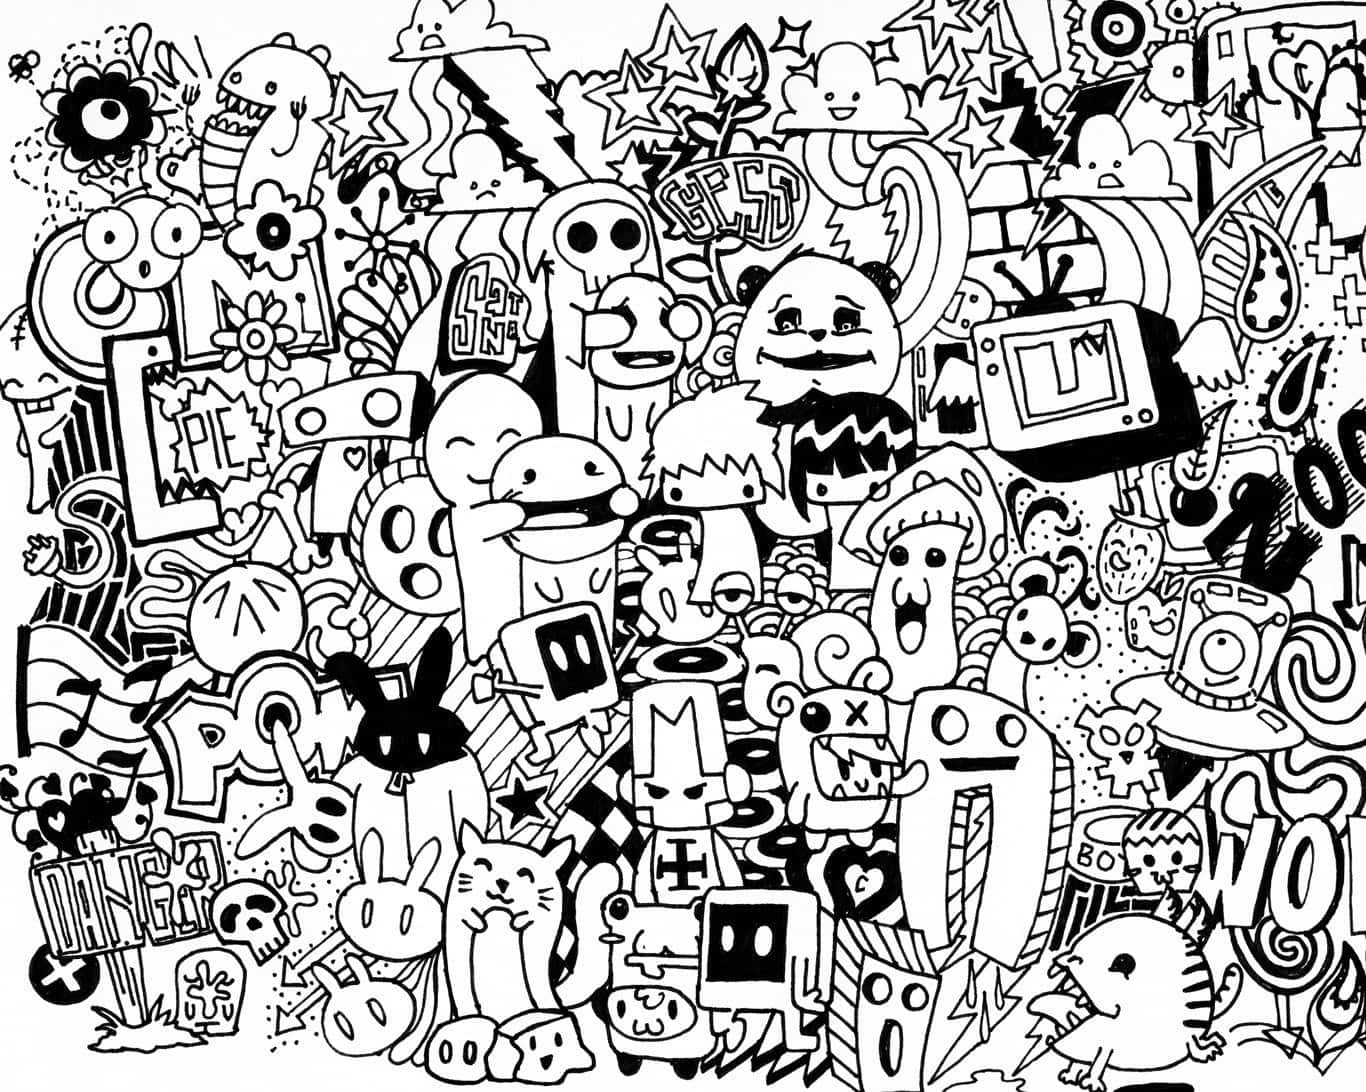 Download Doodle 1366 X 1092 Picture | Wallpapers.com